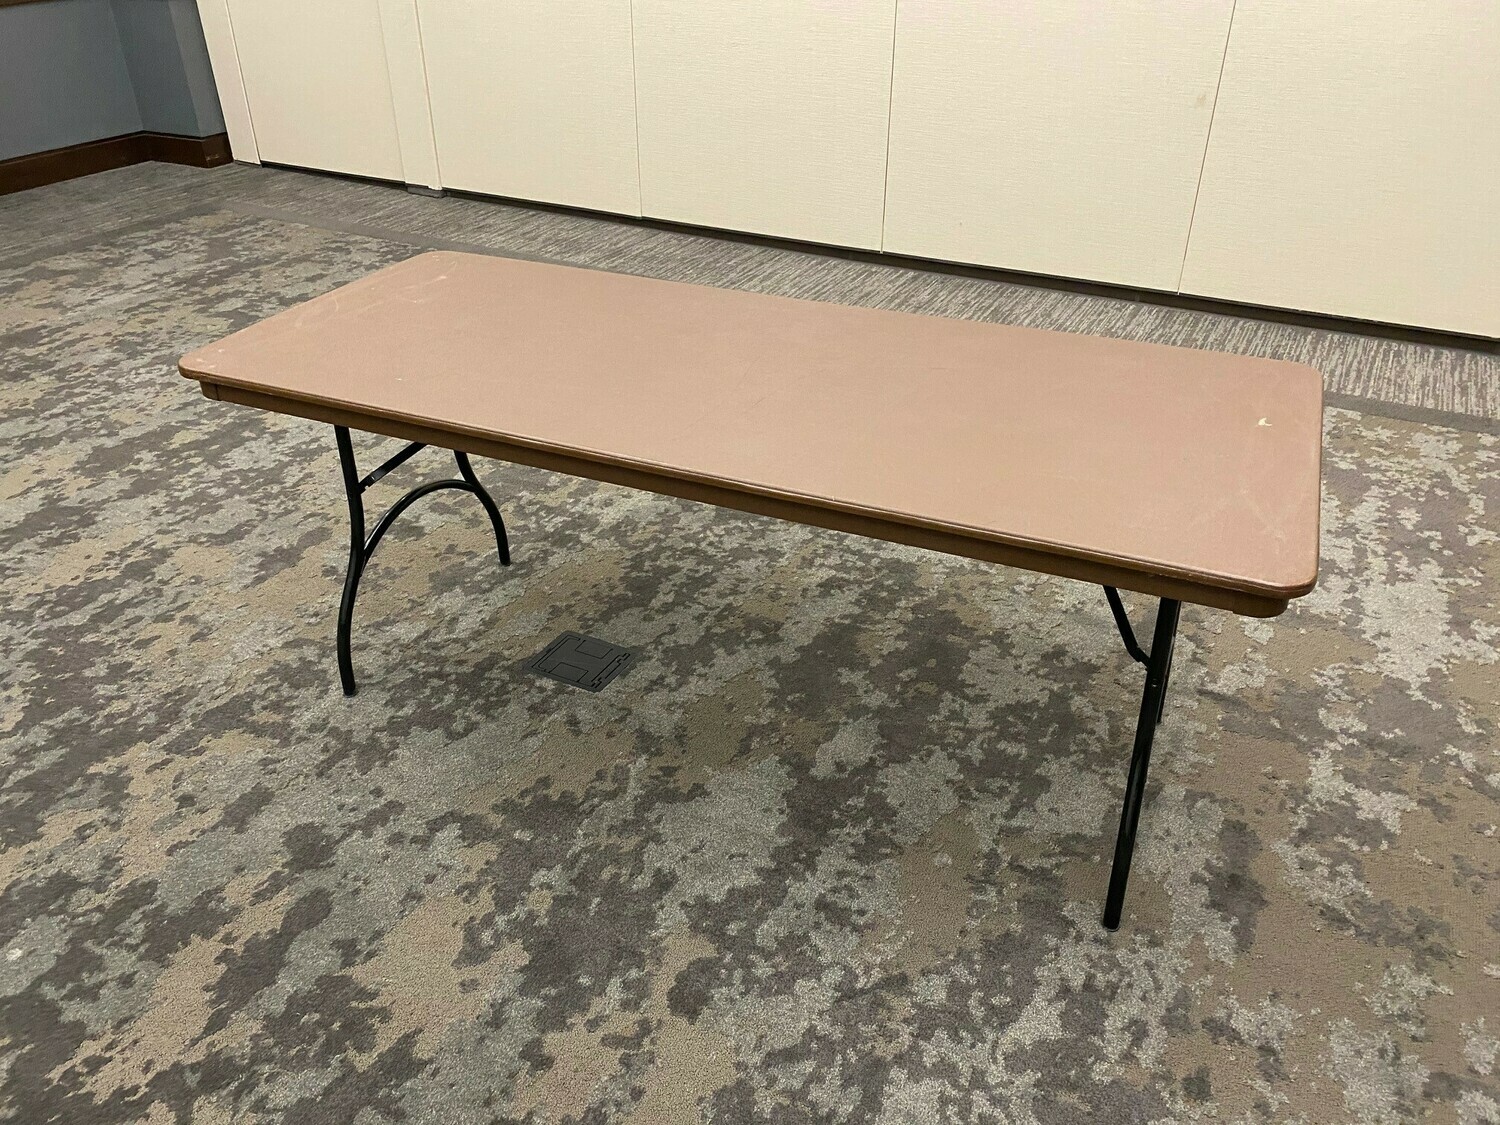 Additional Table